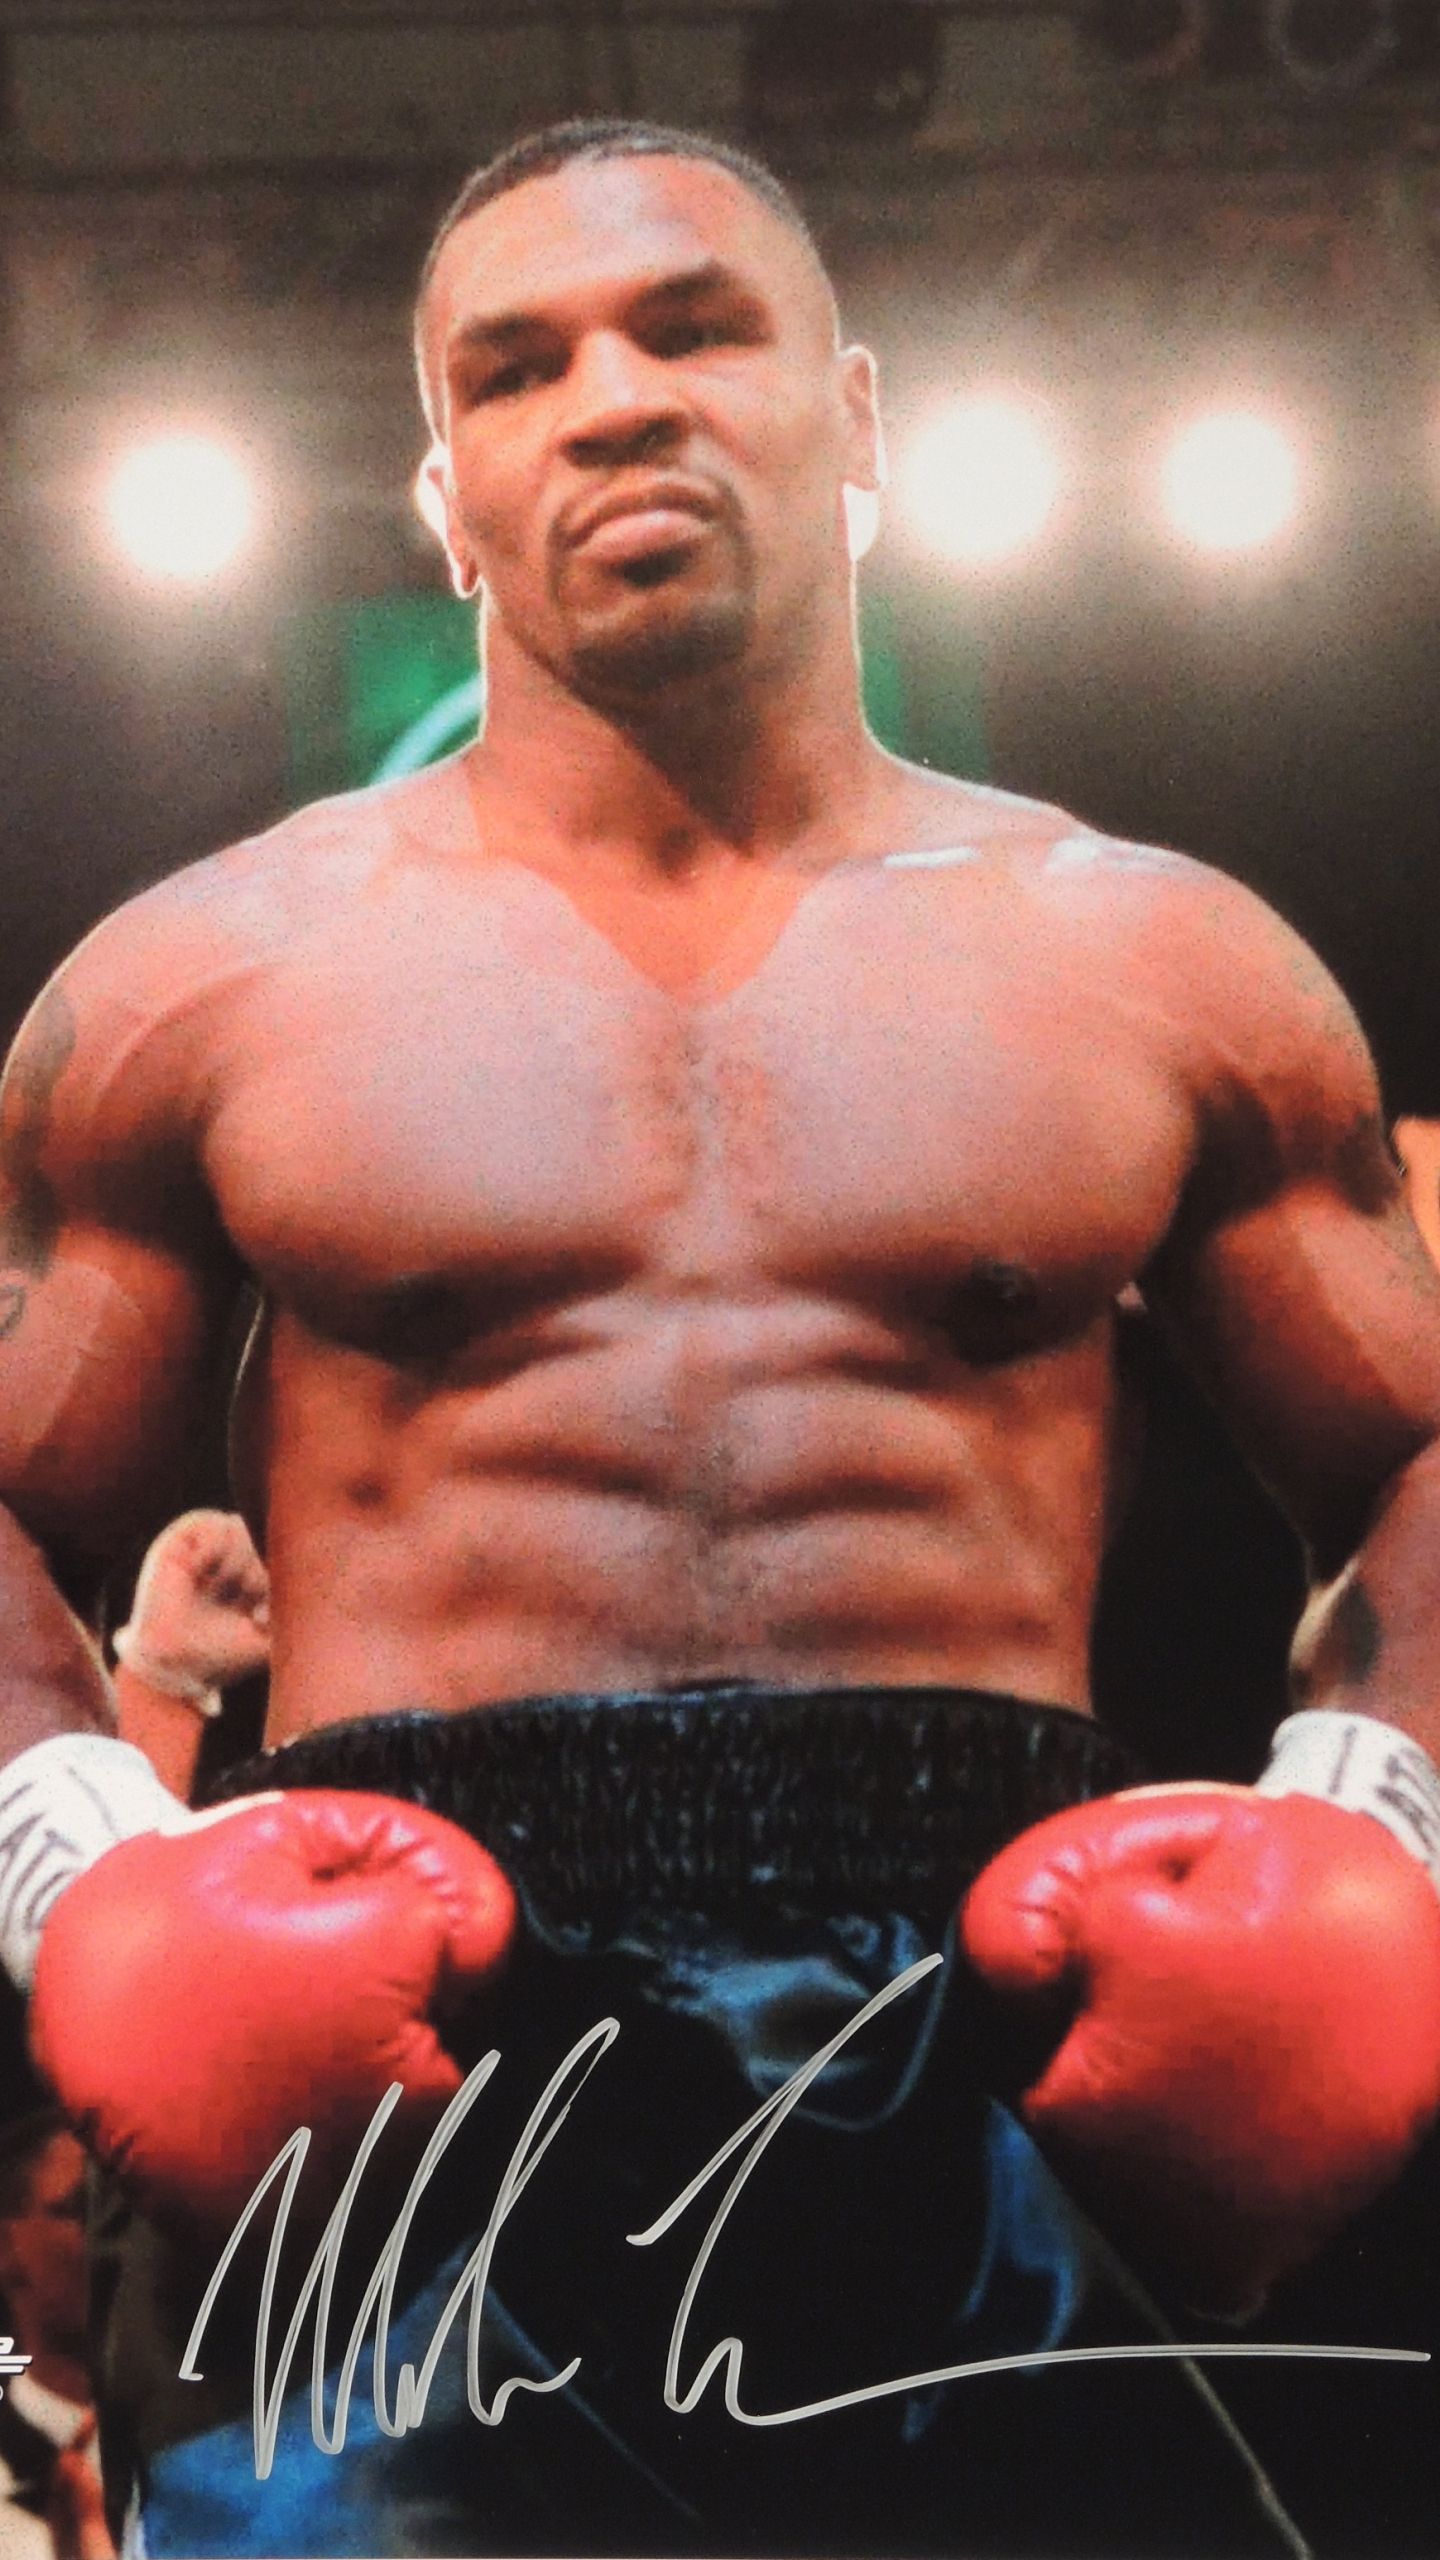 1280x905 / 1280x905 mike tyson windows wallpaper - Coolwallpapers.me!